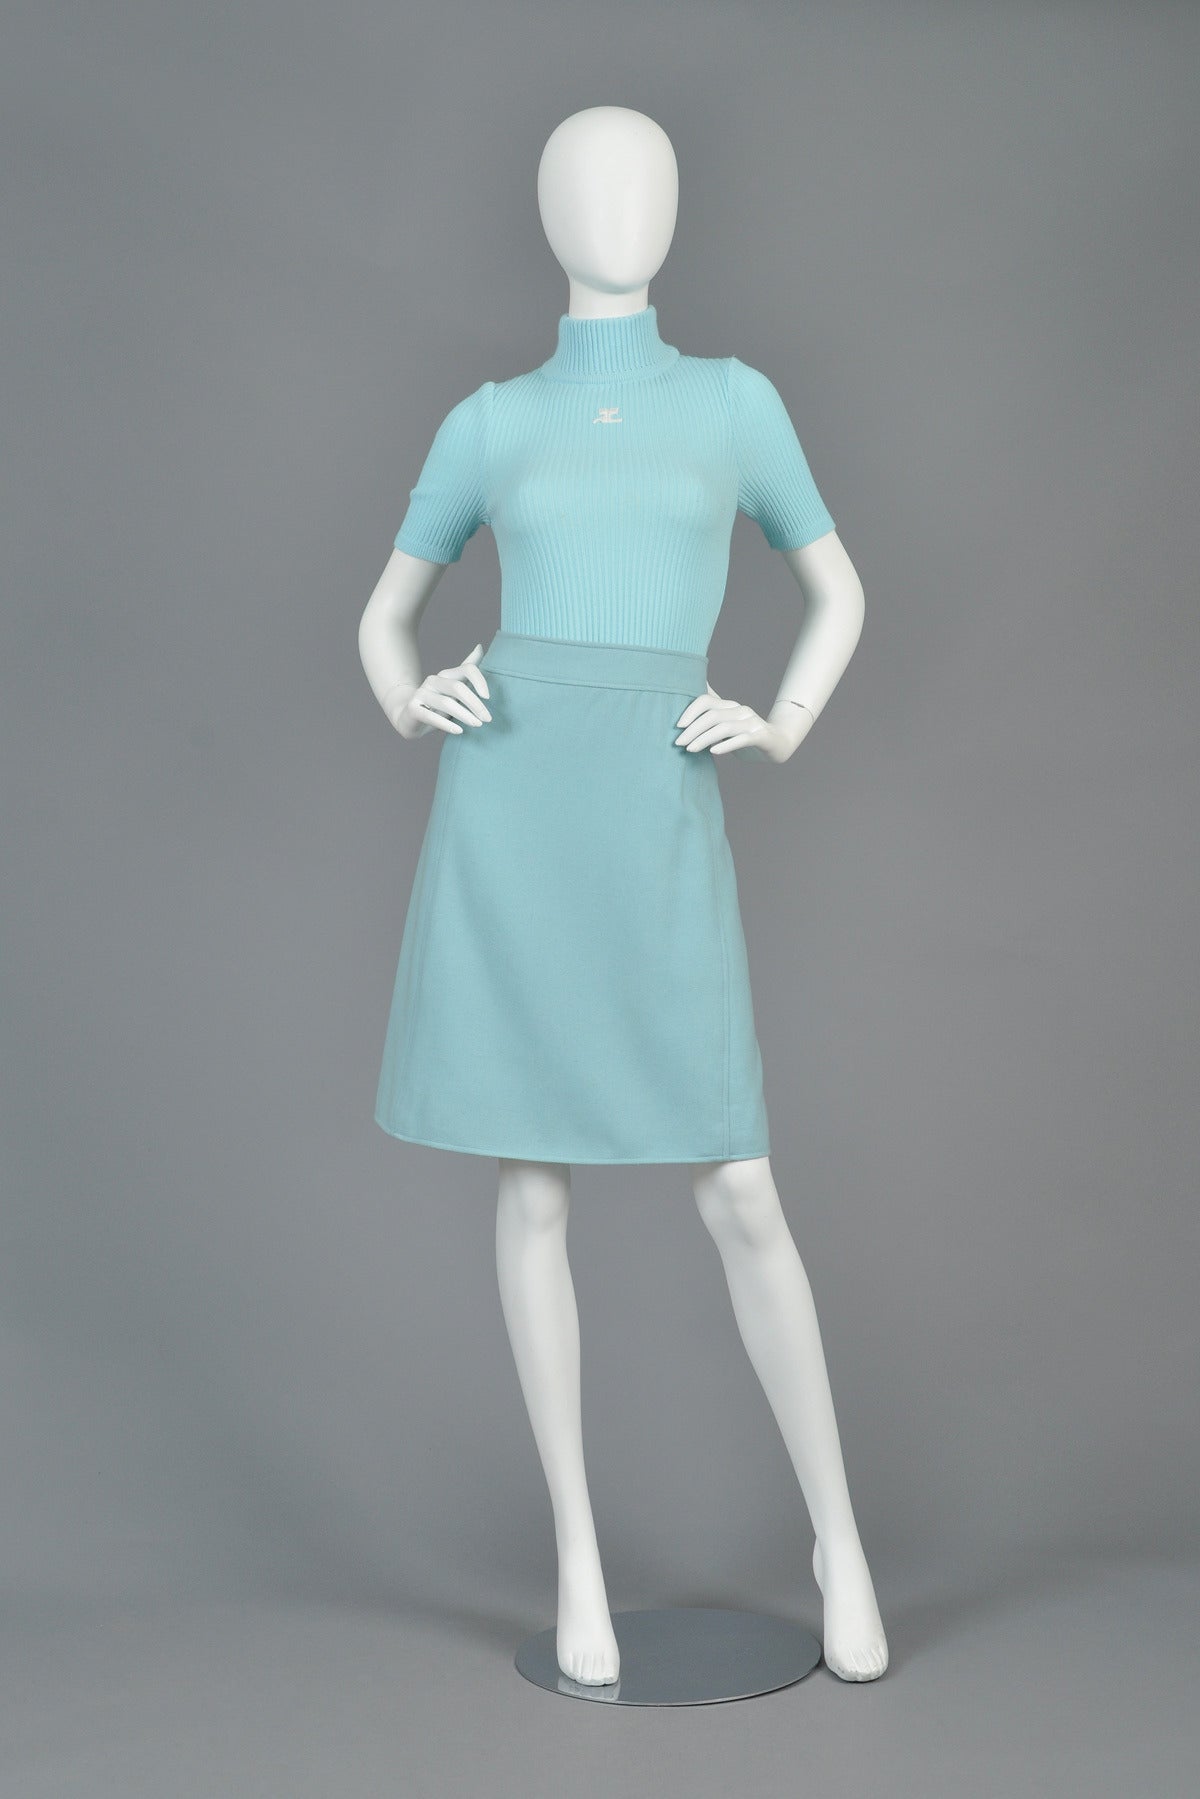 Classic vintage 1960s/70s Courrèges baby blue mod skirt. Simple, flattering shape with perfect stitched details. Concealed zipper on back quarter. Twilled wool blend. Fully labeled. Excellent vintage condition.

MEASUREMENTS
Waist: 25